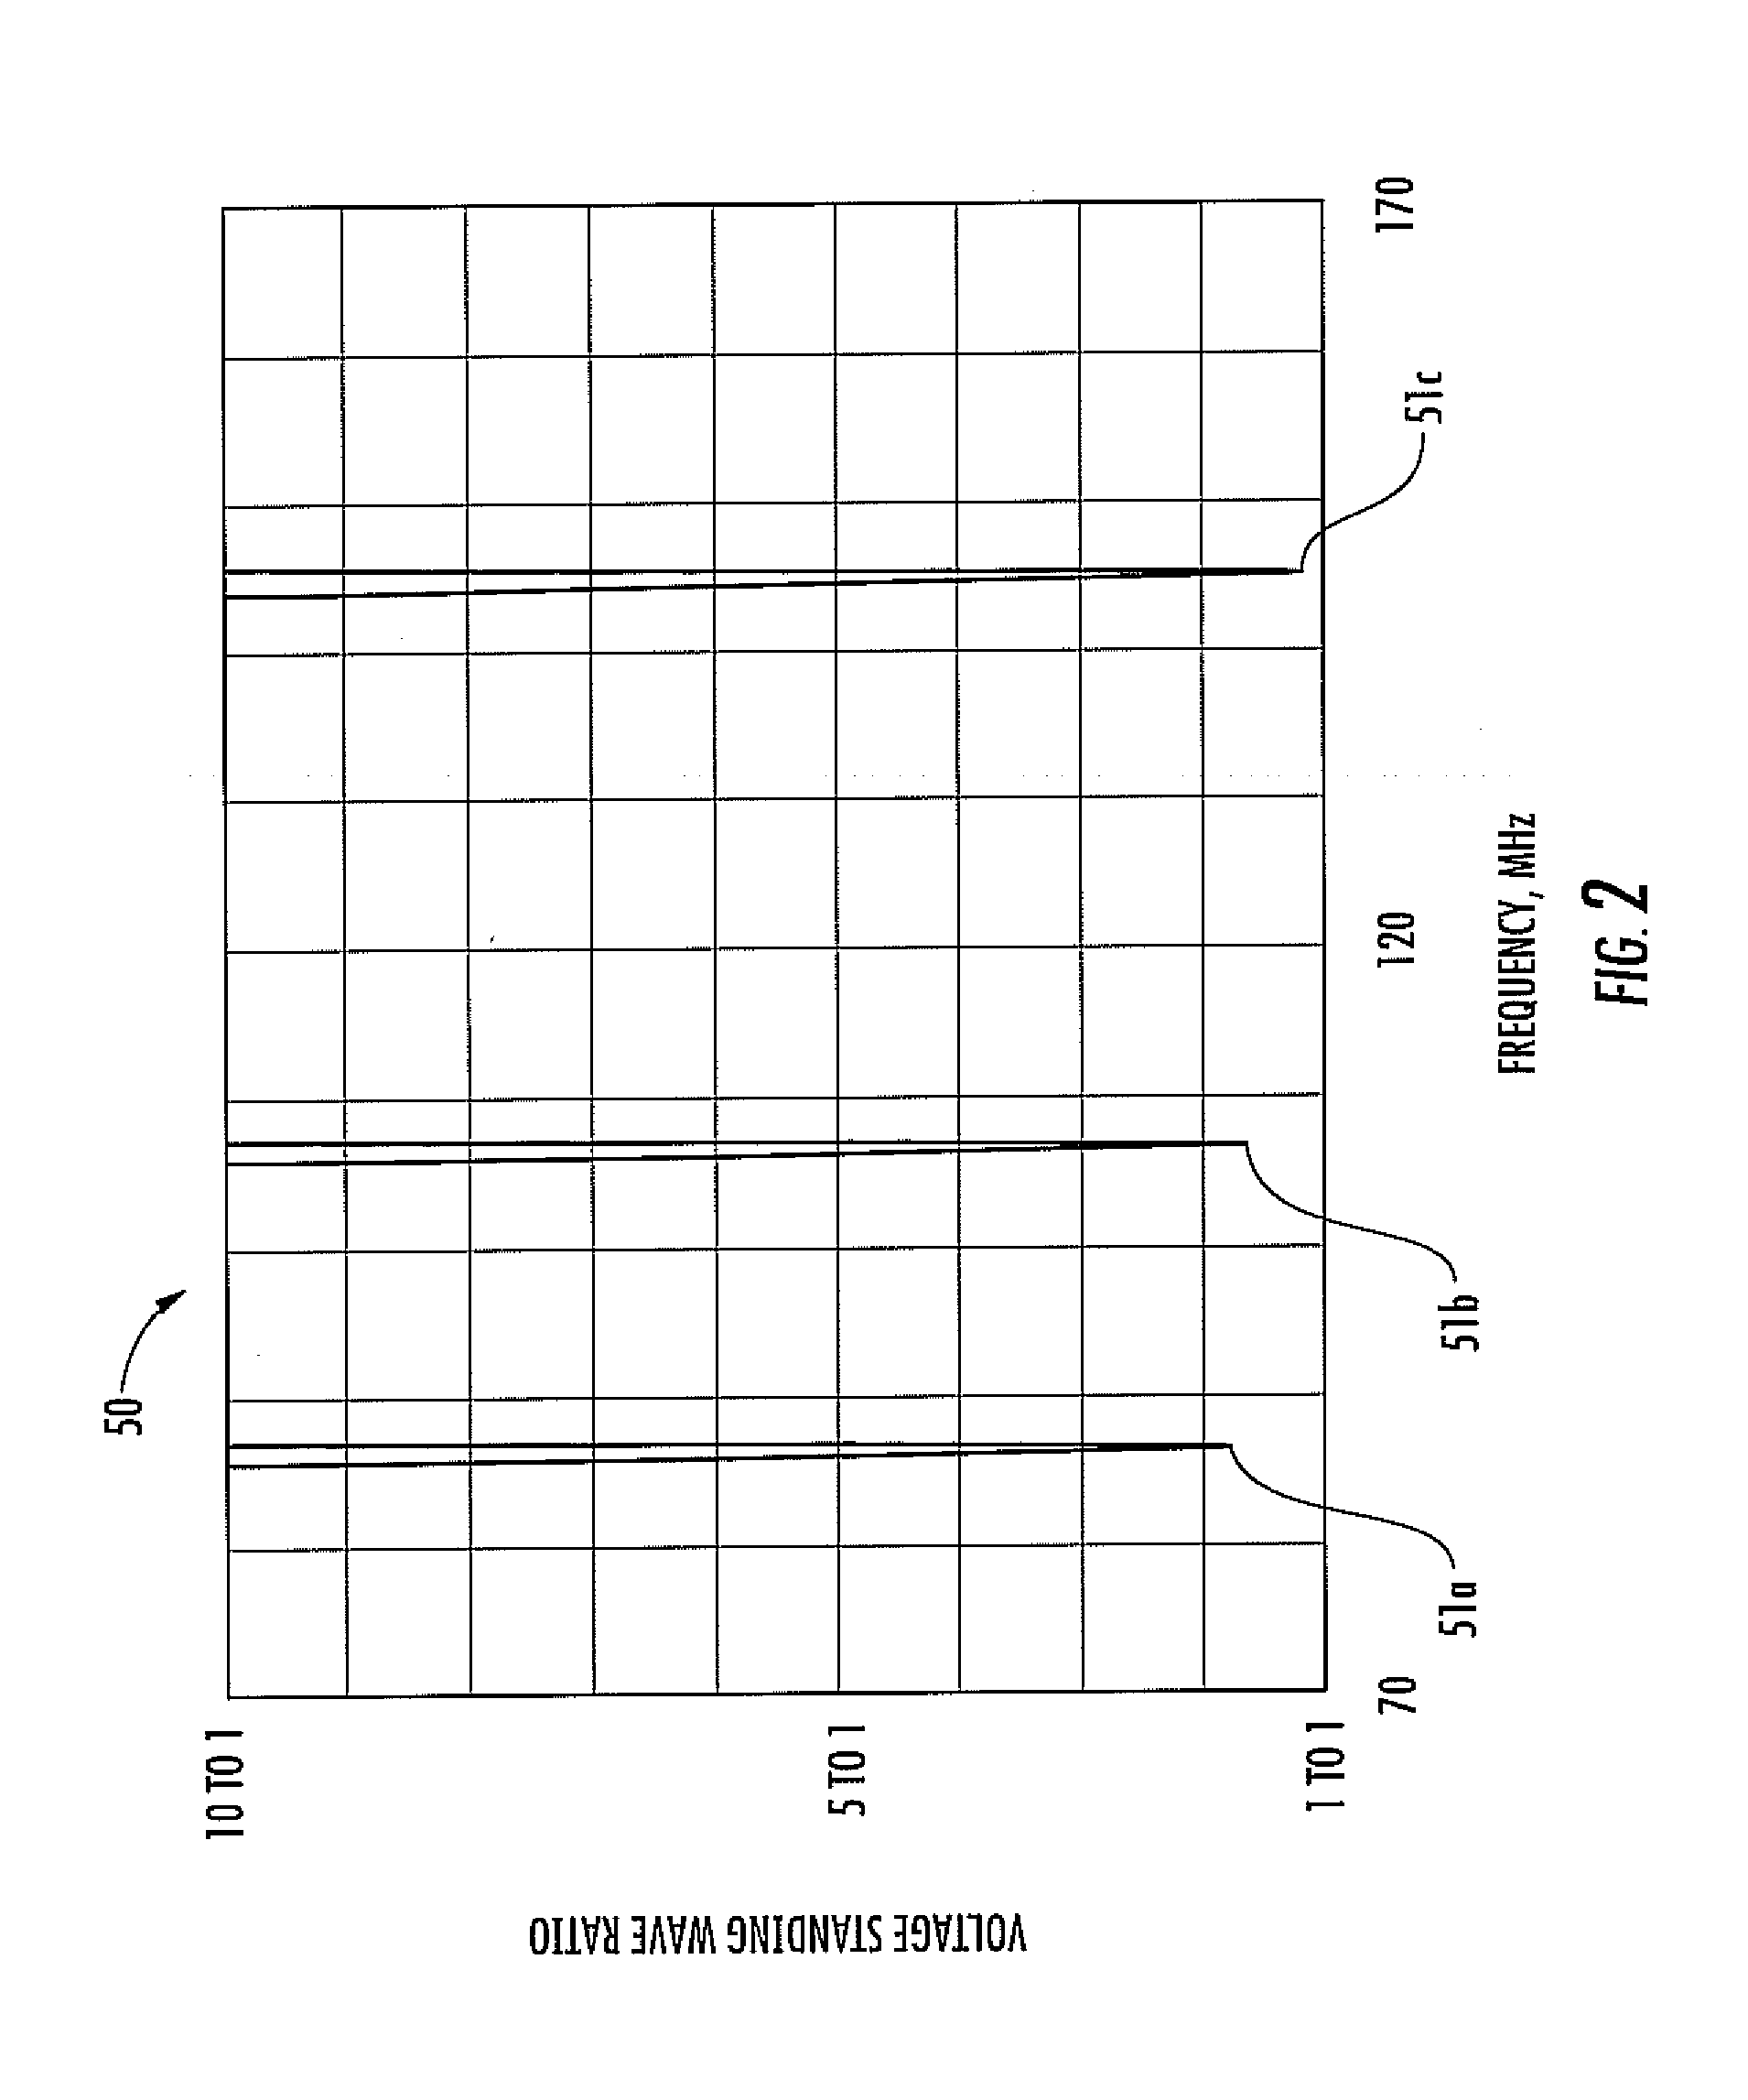 Wireless communications device including side-by-side passive loop antennas and related methods